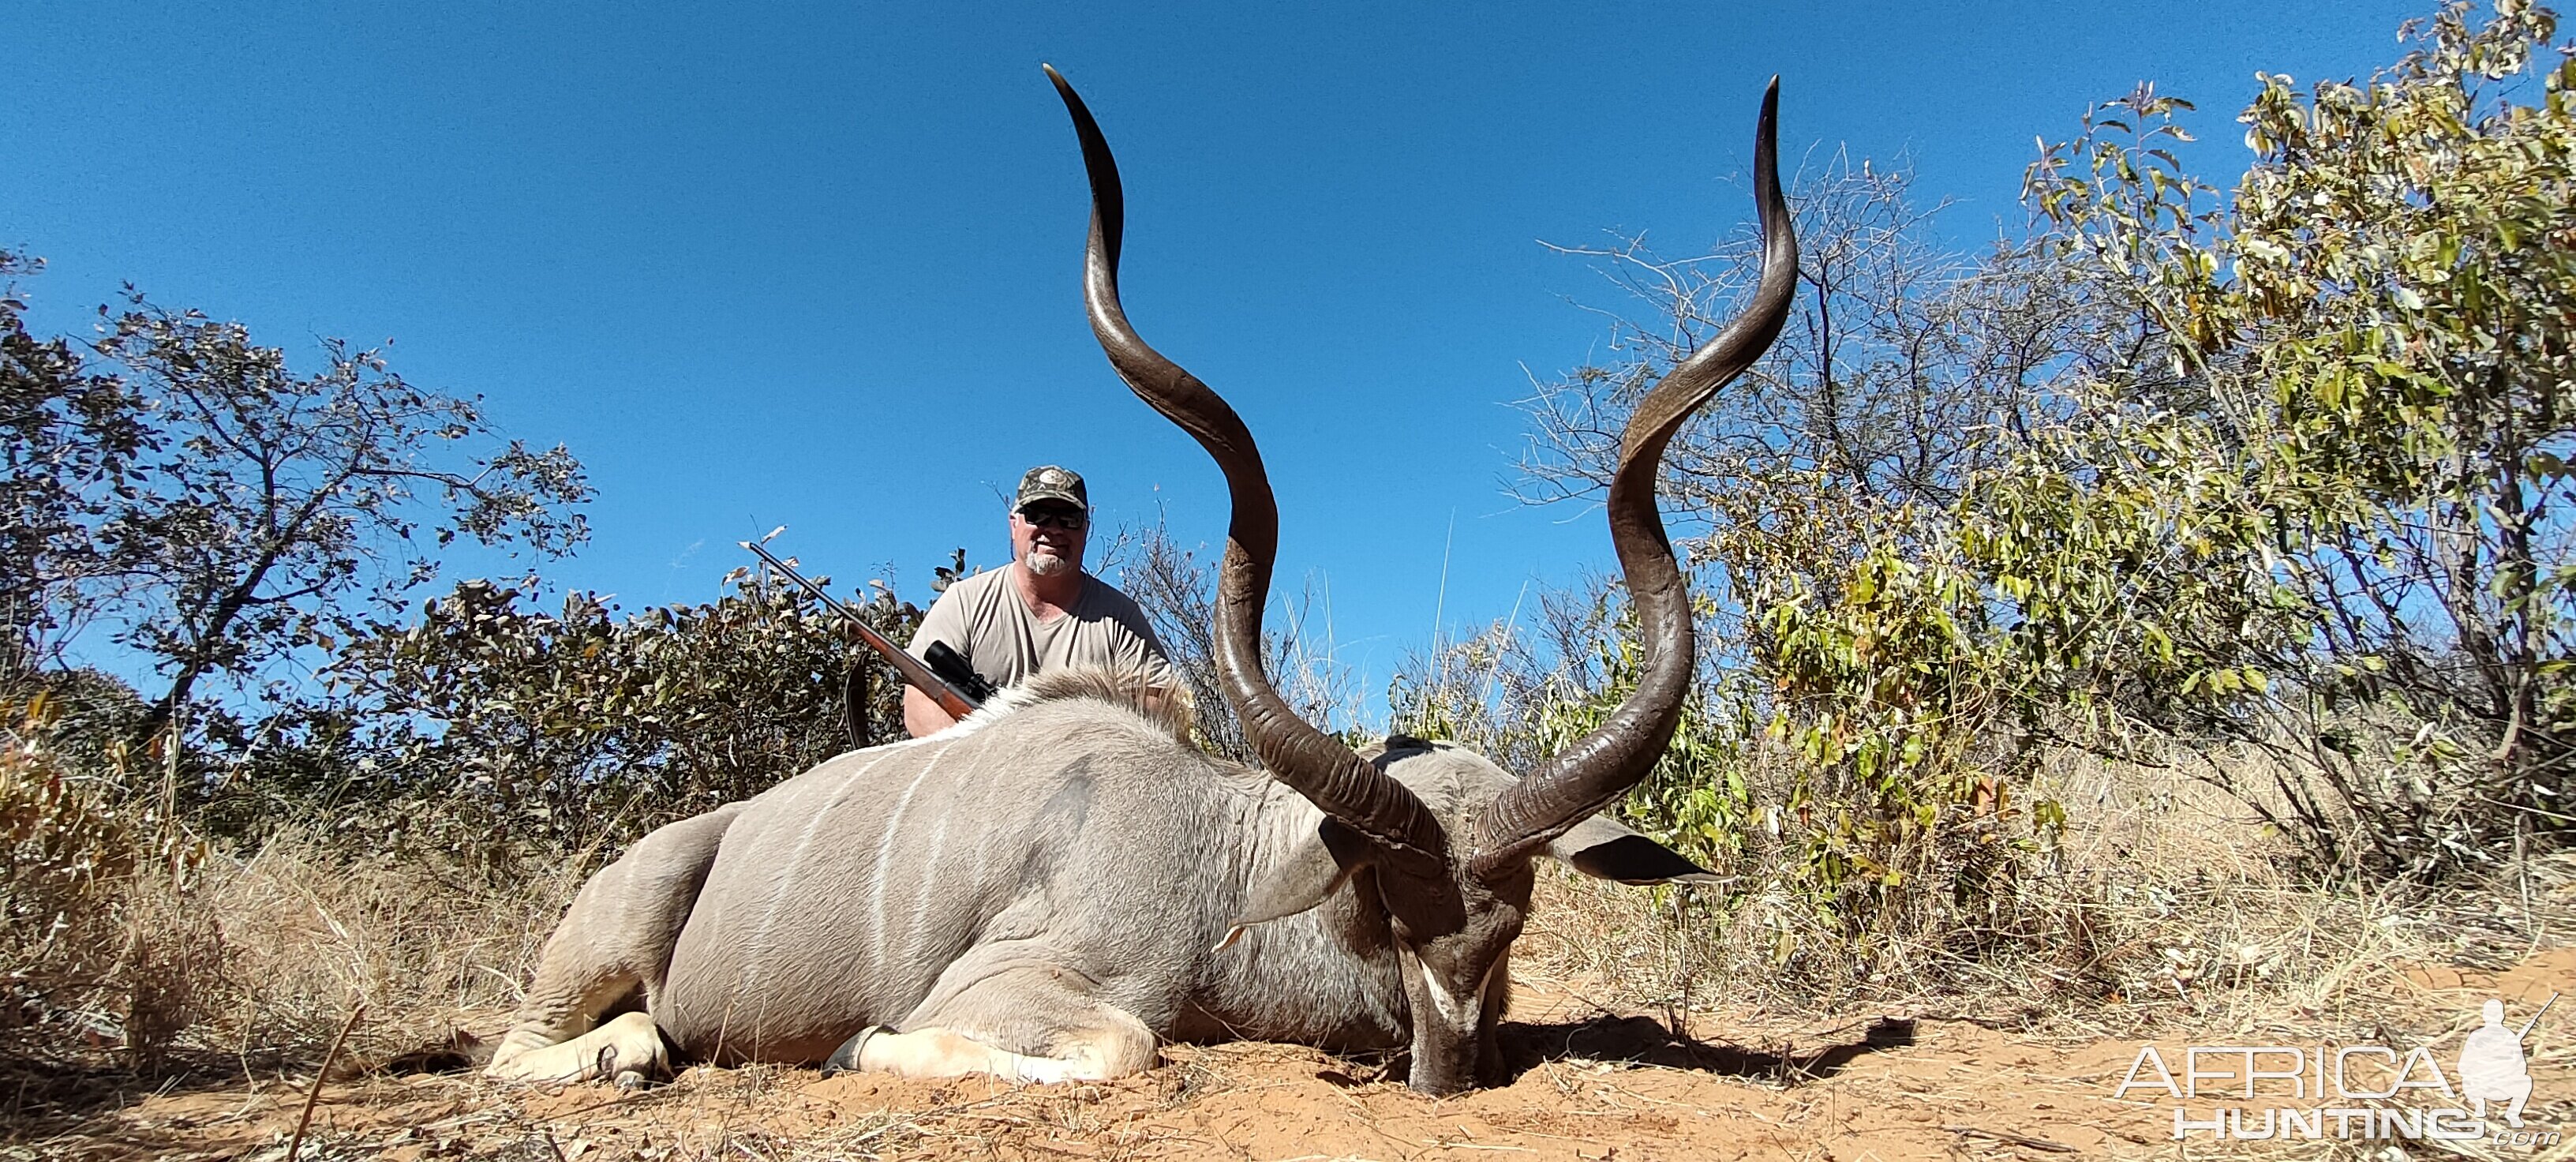 Kudu Hunting South Africa | AfricaHunting.com